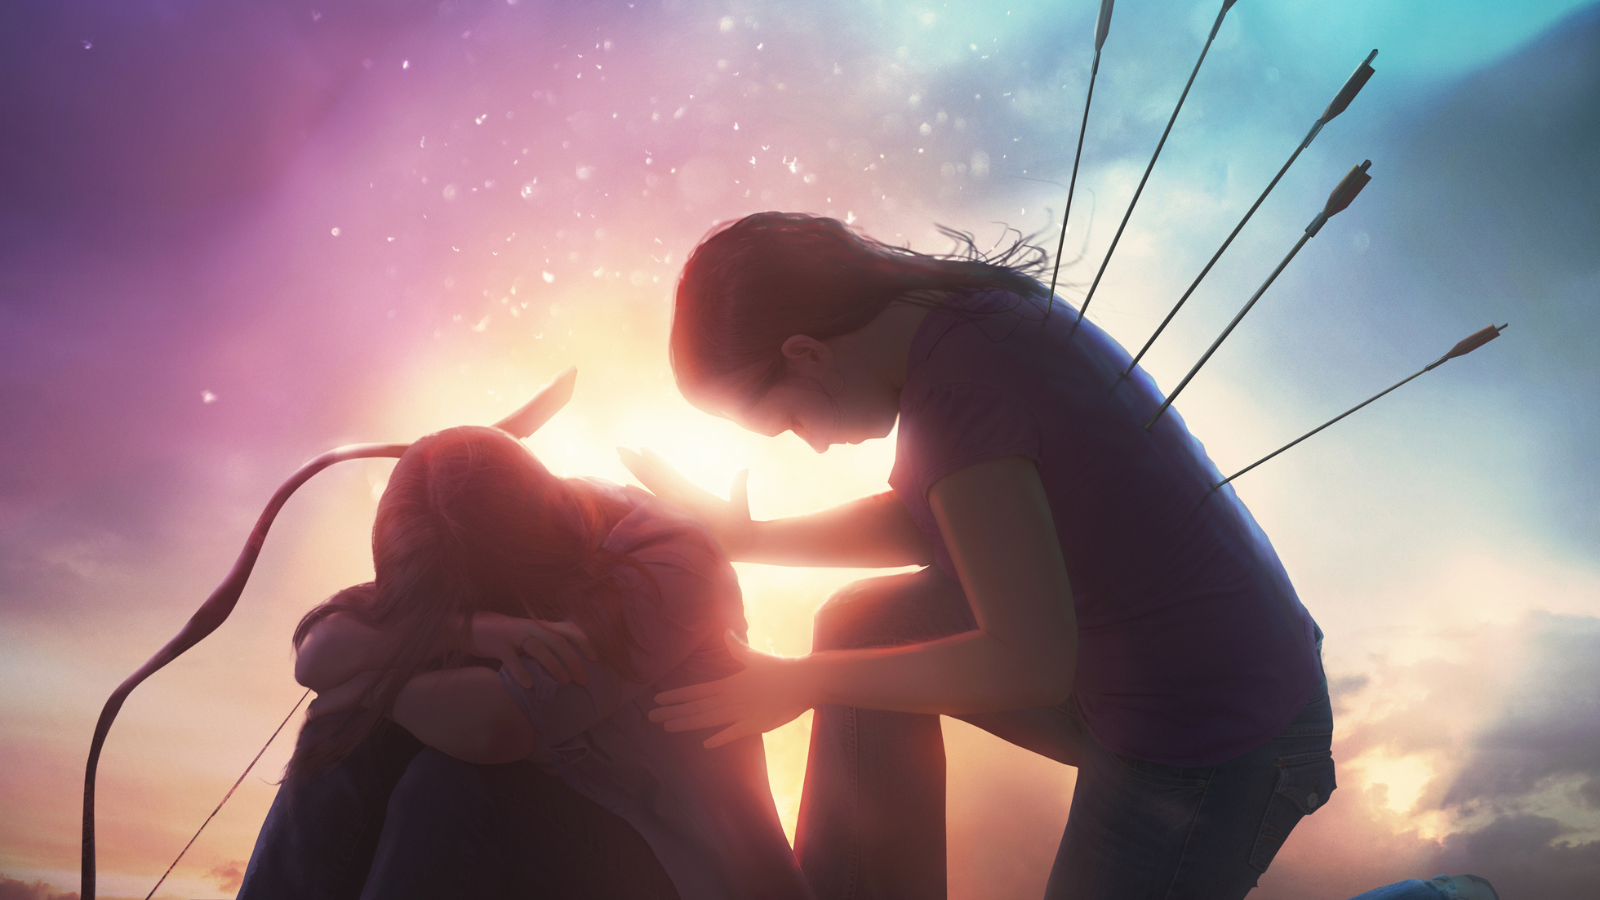 A purple, pink, and blue stary background, with two women. One with a bow by her crying into her knees, one with arrows in her back praying over the other.